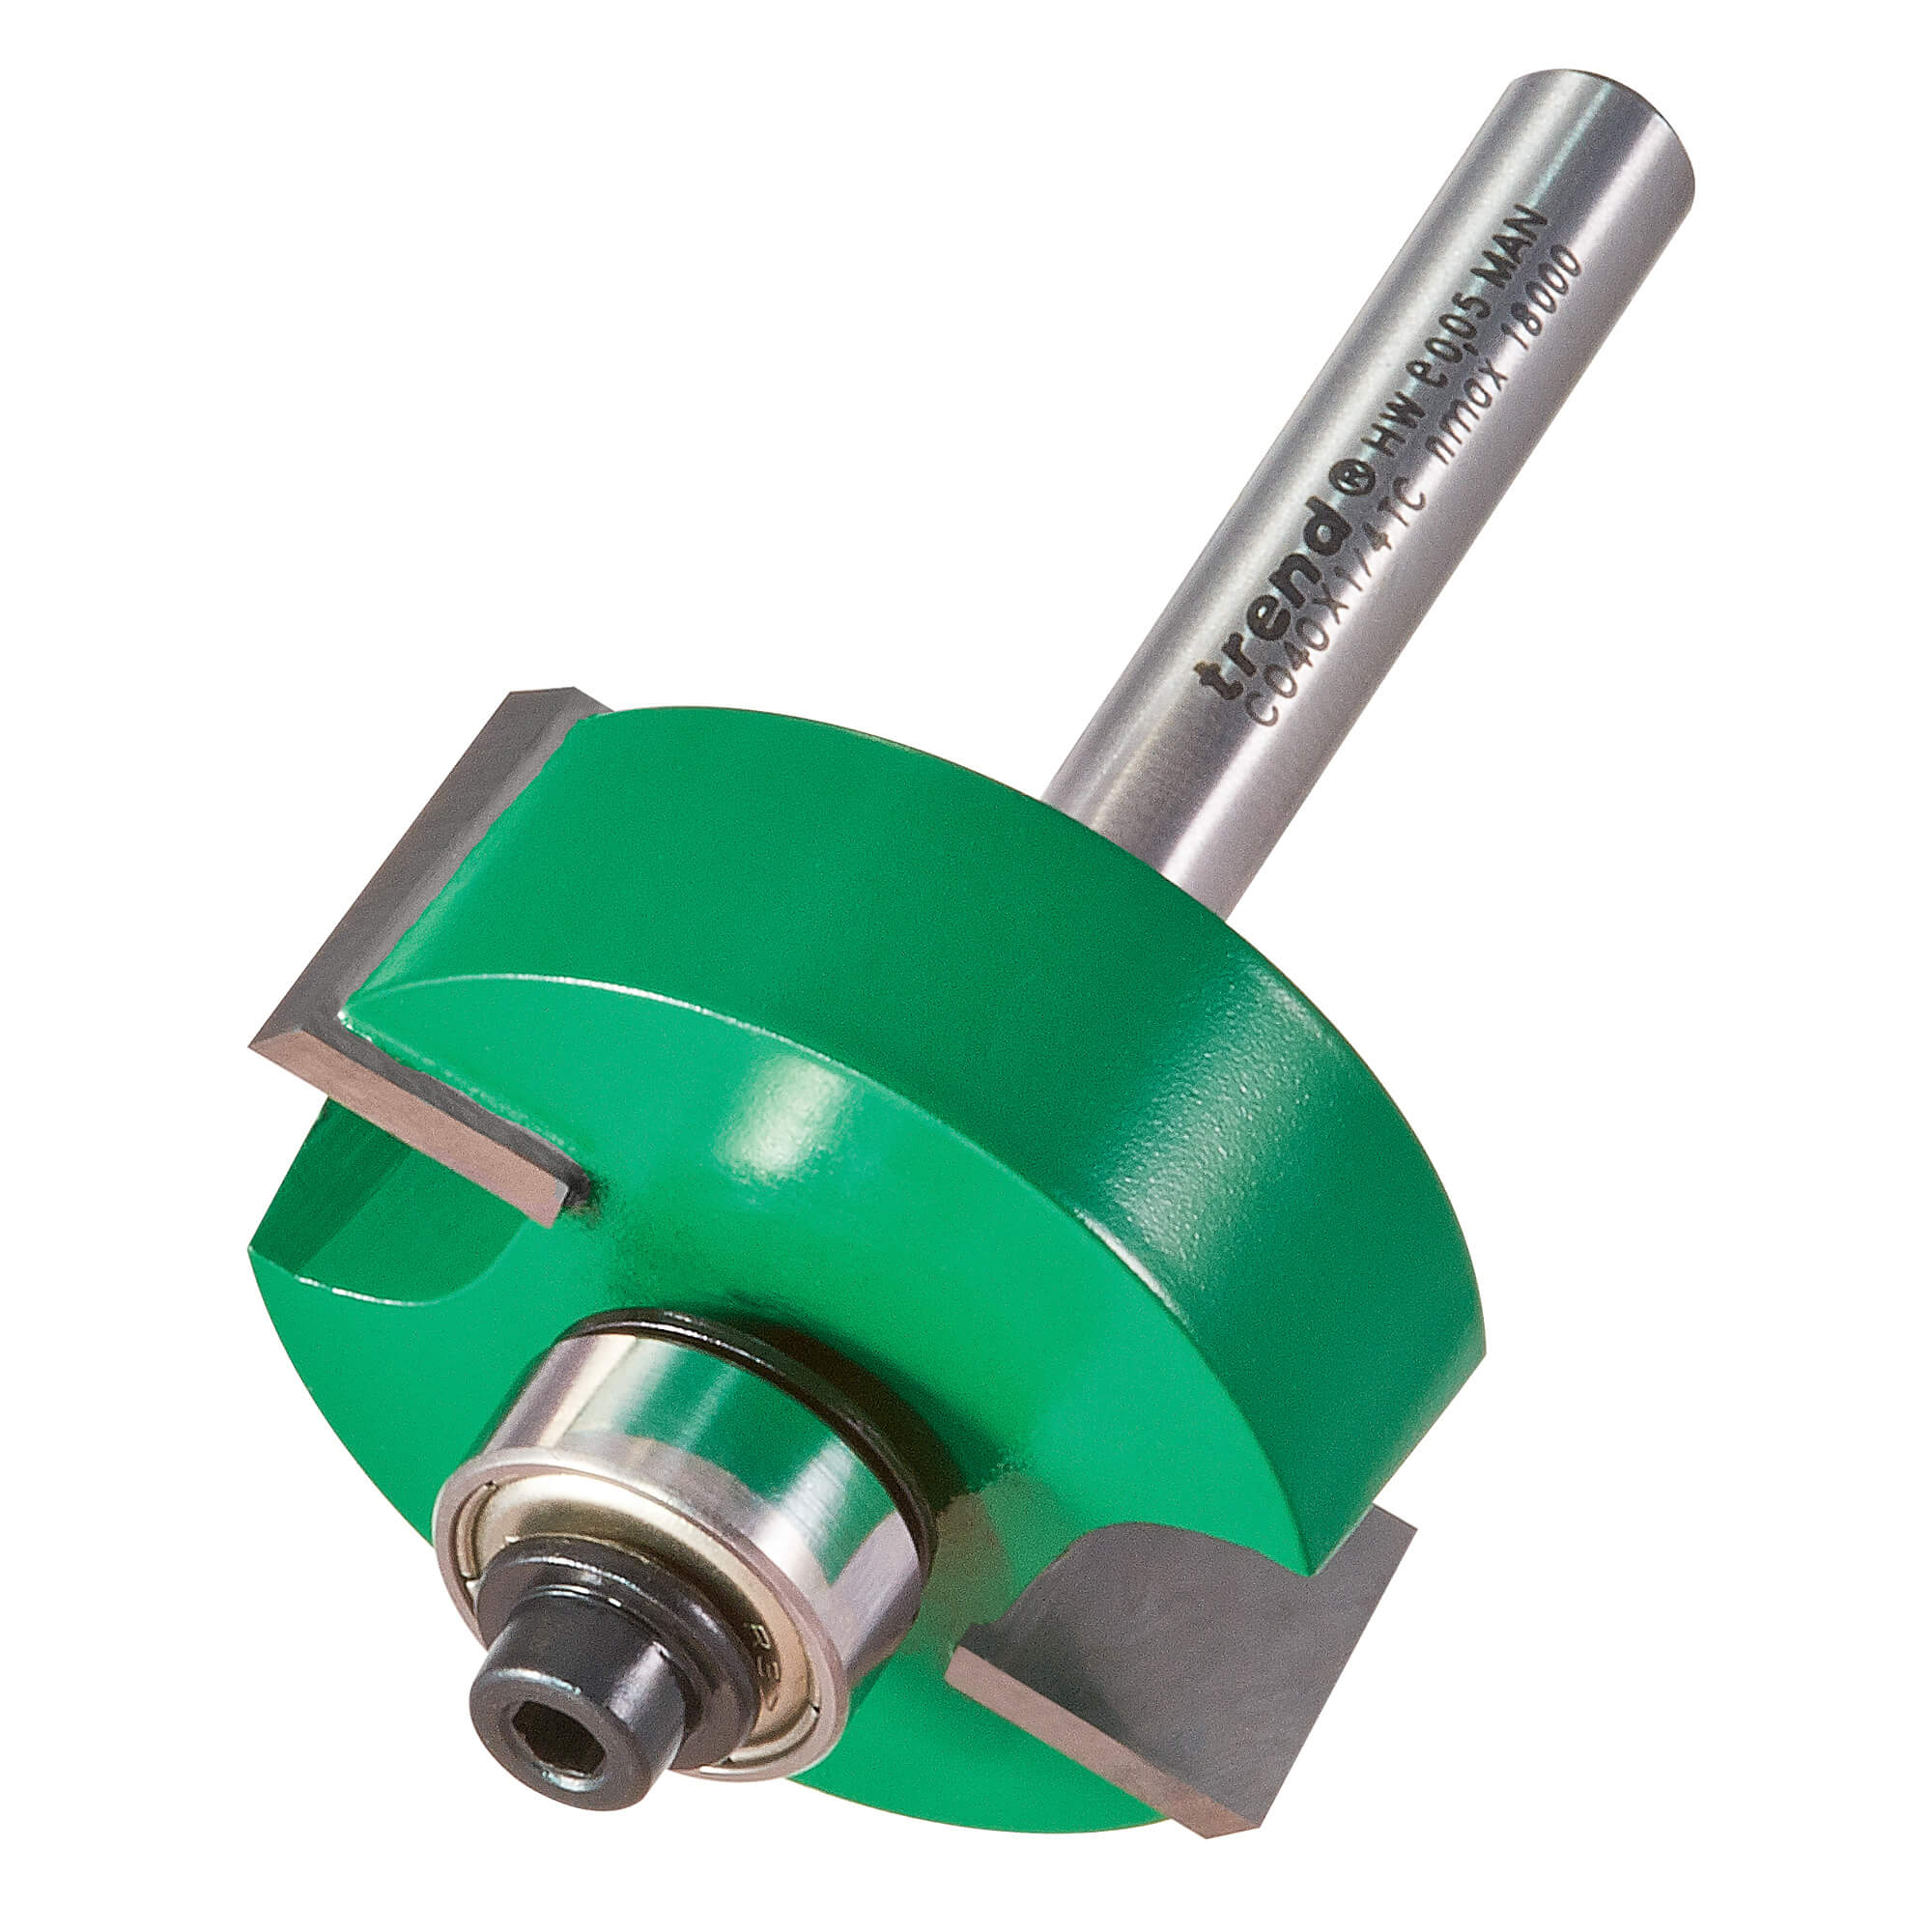 Image of Trend Bearing Self Guided Rebate Router Cutter 35mm 12.7mm 1/4"